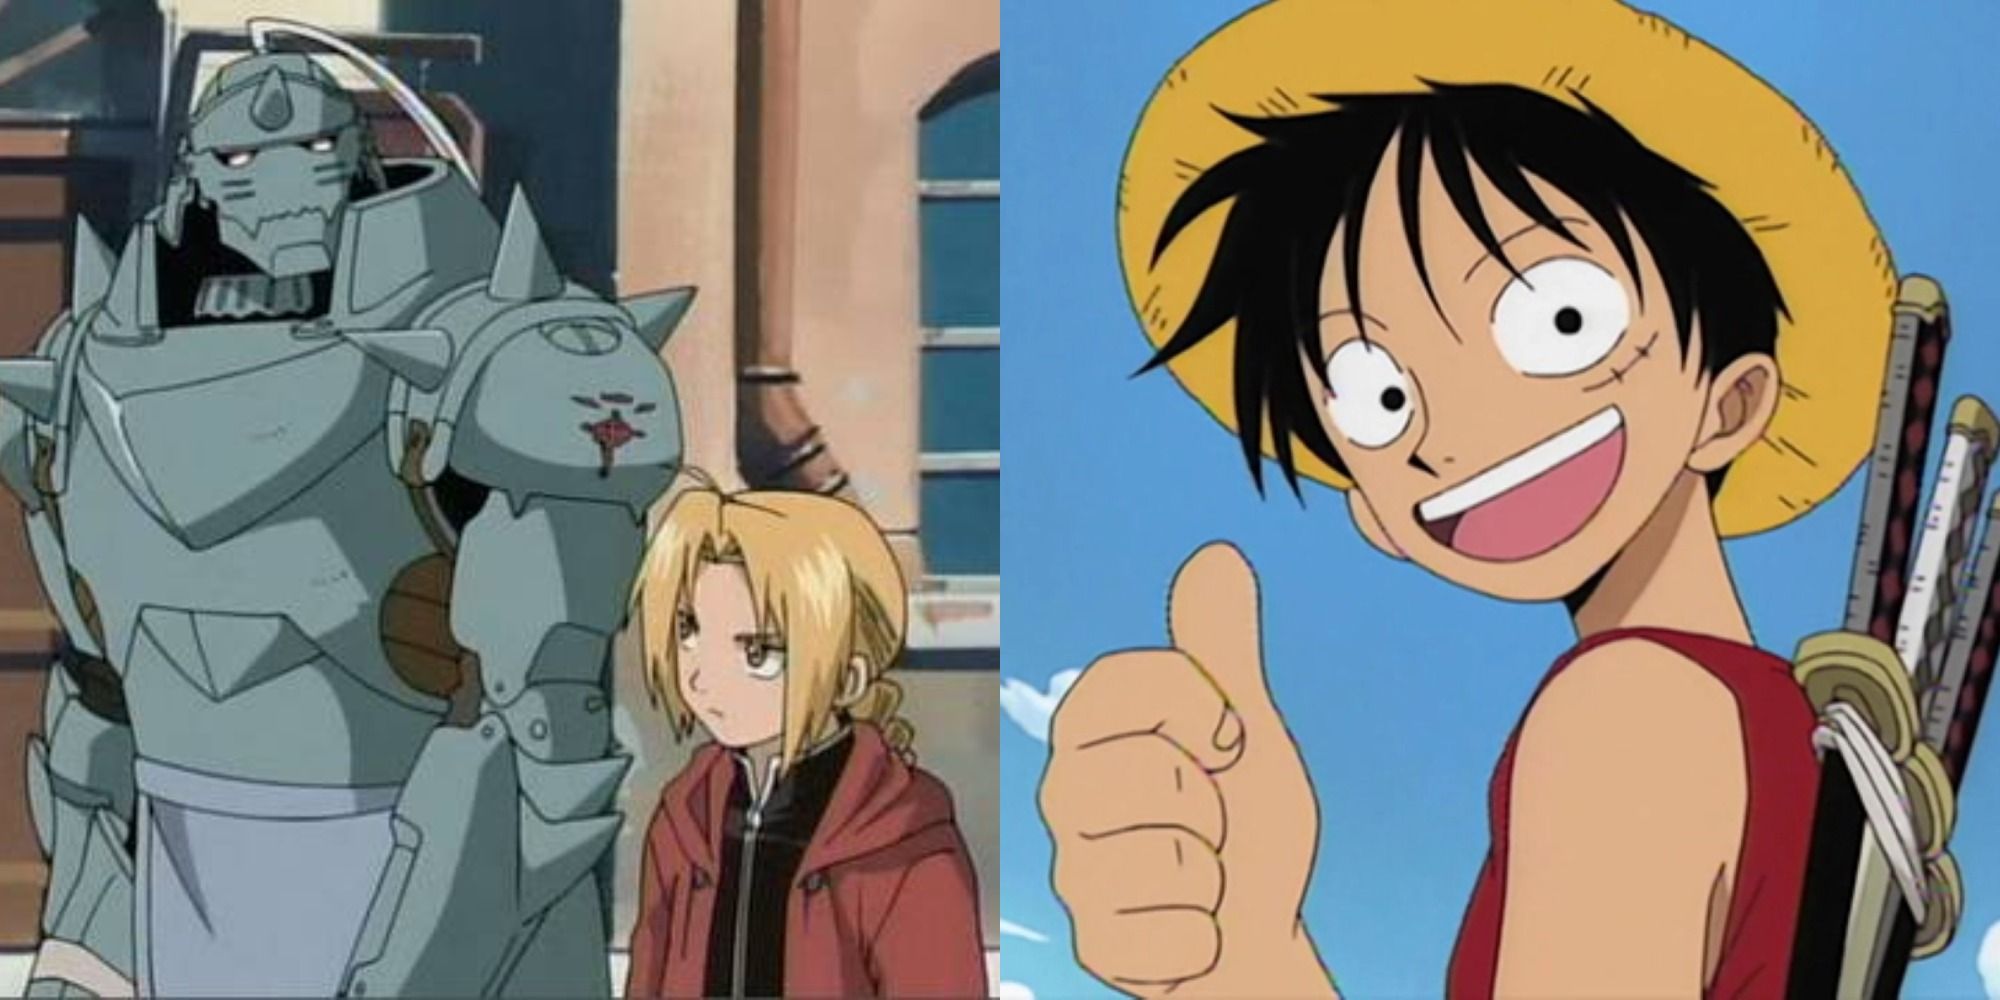 35+ Egotistical Anime Characters Ranked By How Into Themselves They